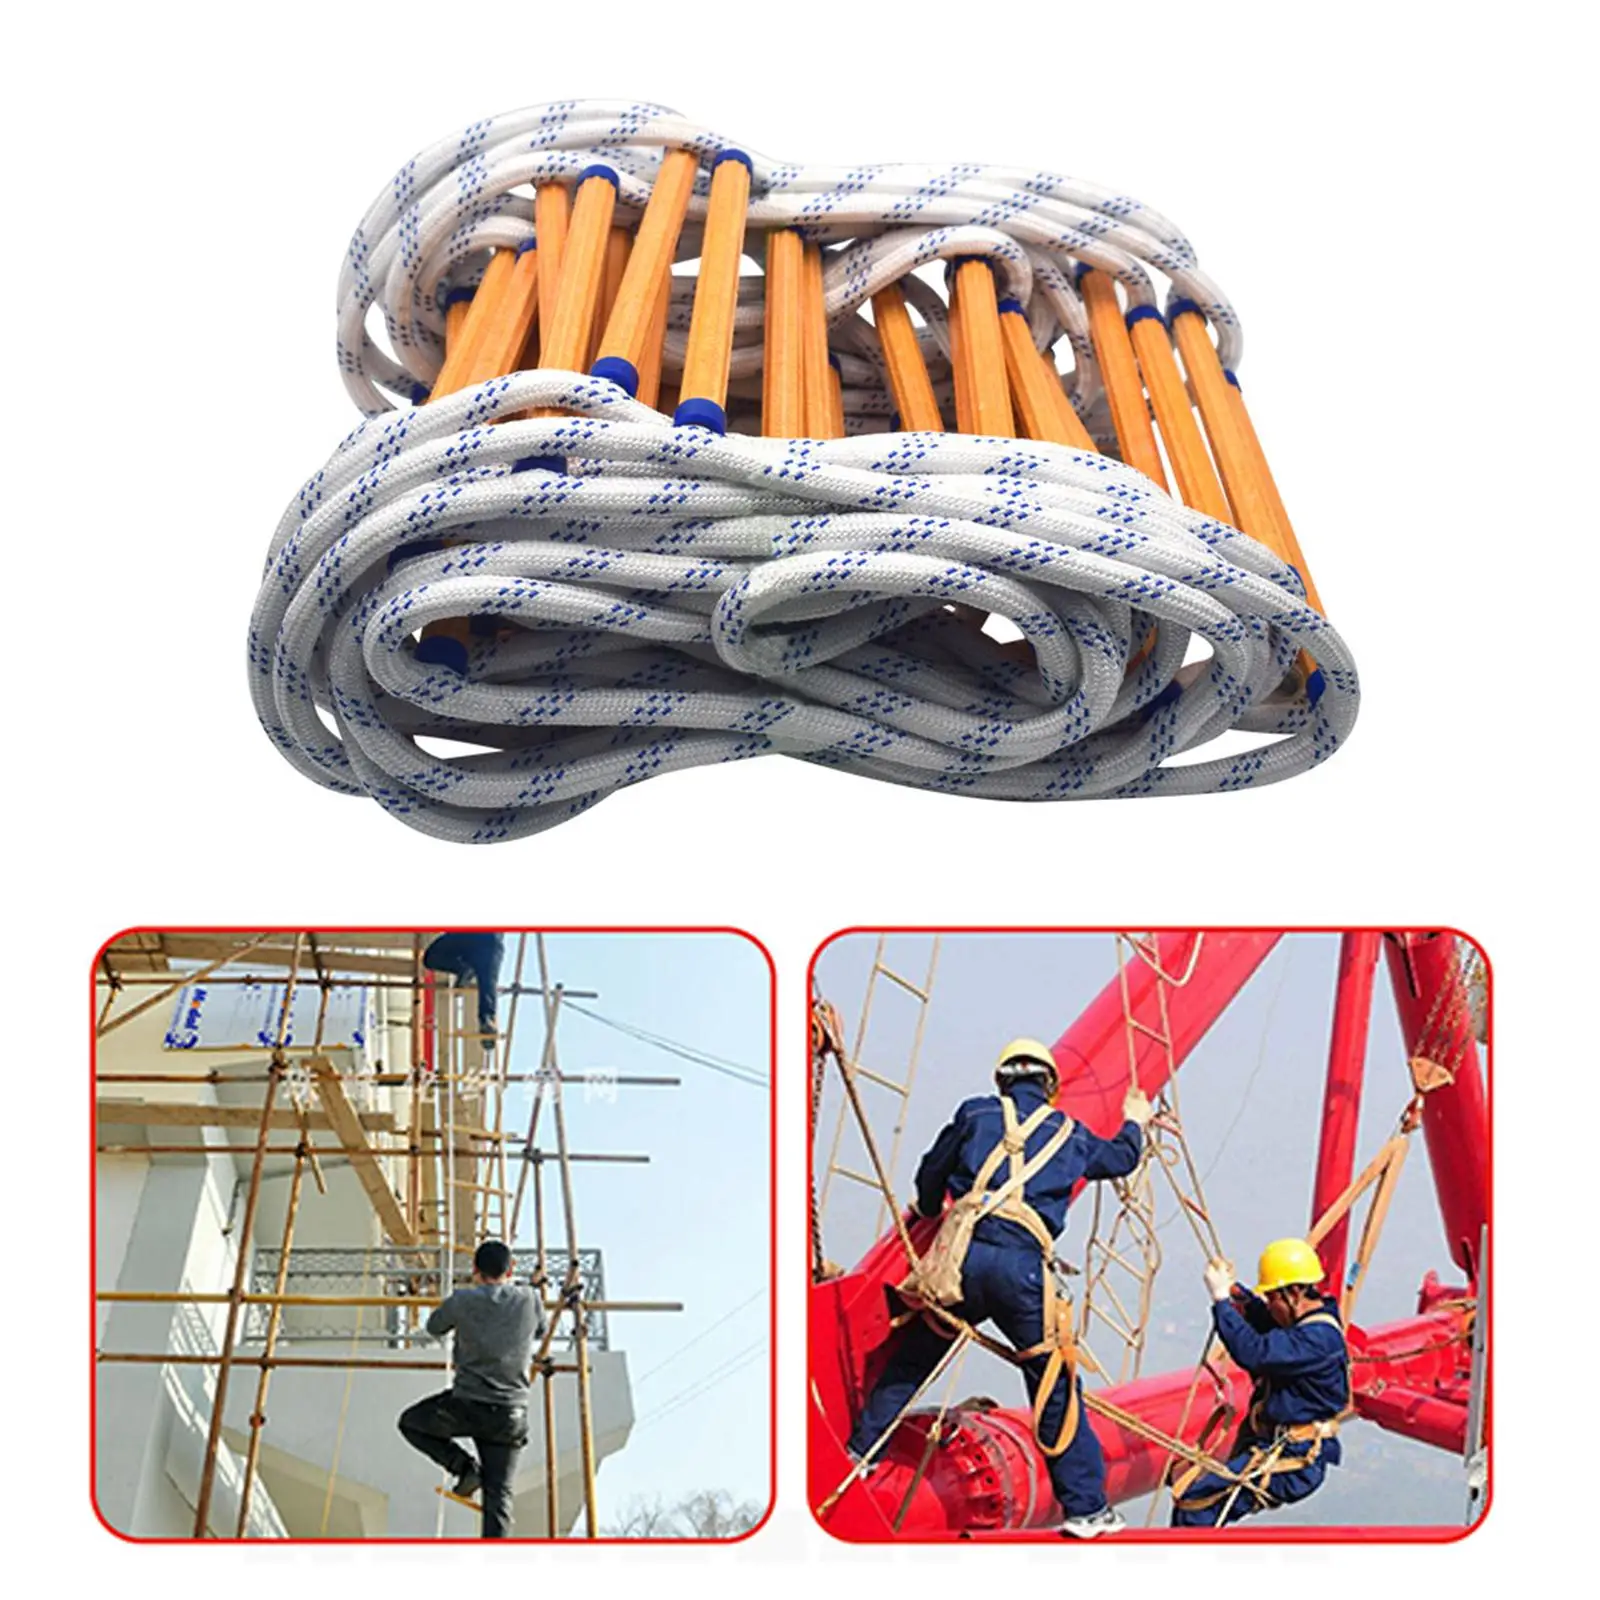   Fire Escape Ladder Soft Rope Fast to Deploy Reusable Kids Adults Flame Resistant for Engineering Climbing Outdoor